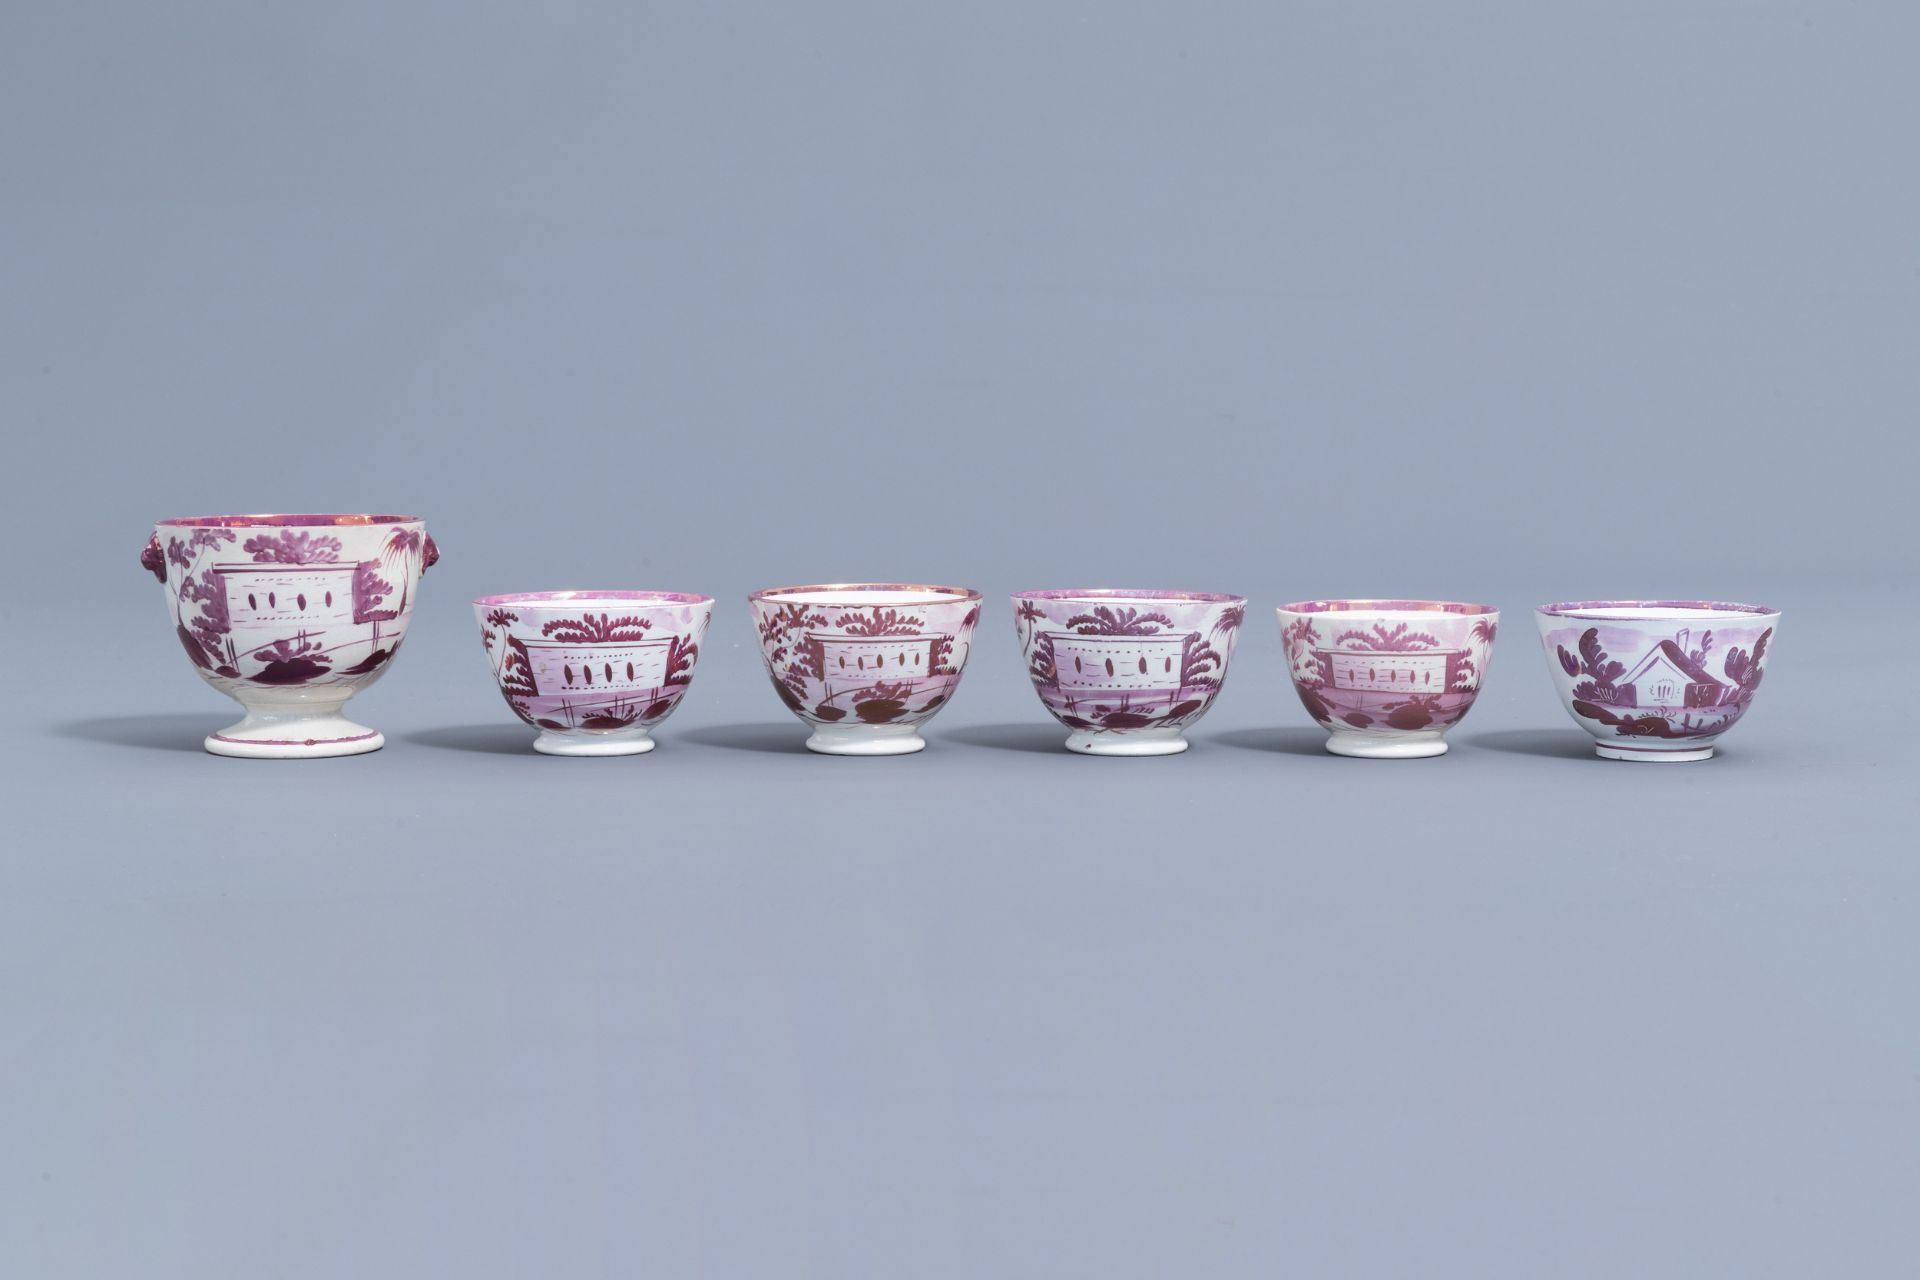 A varied collection of English pink lustreware items with a cottage in a landscape, 19th C. - Image 12 of 50